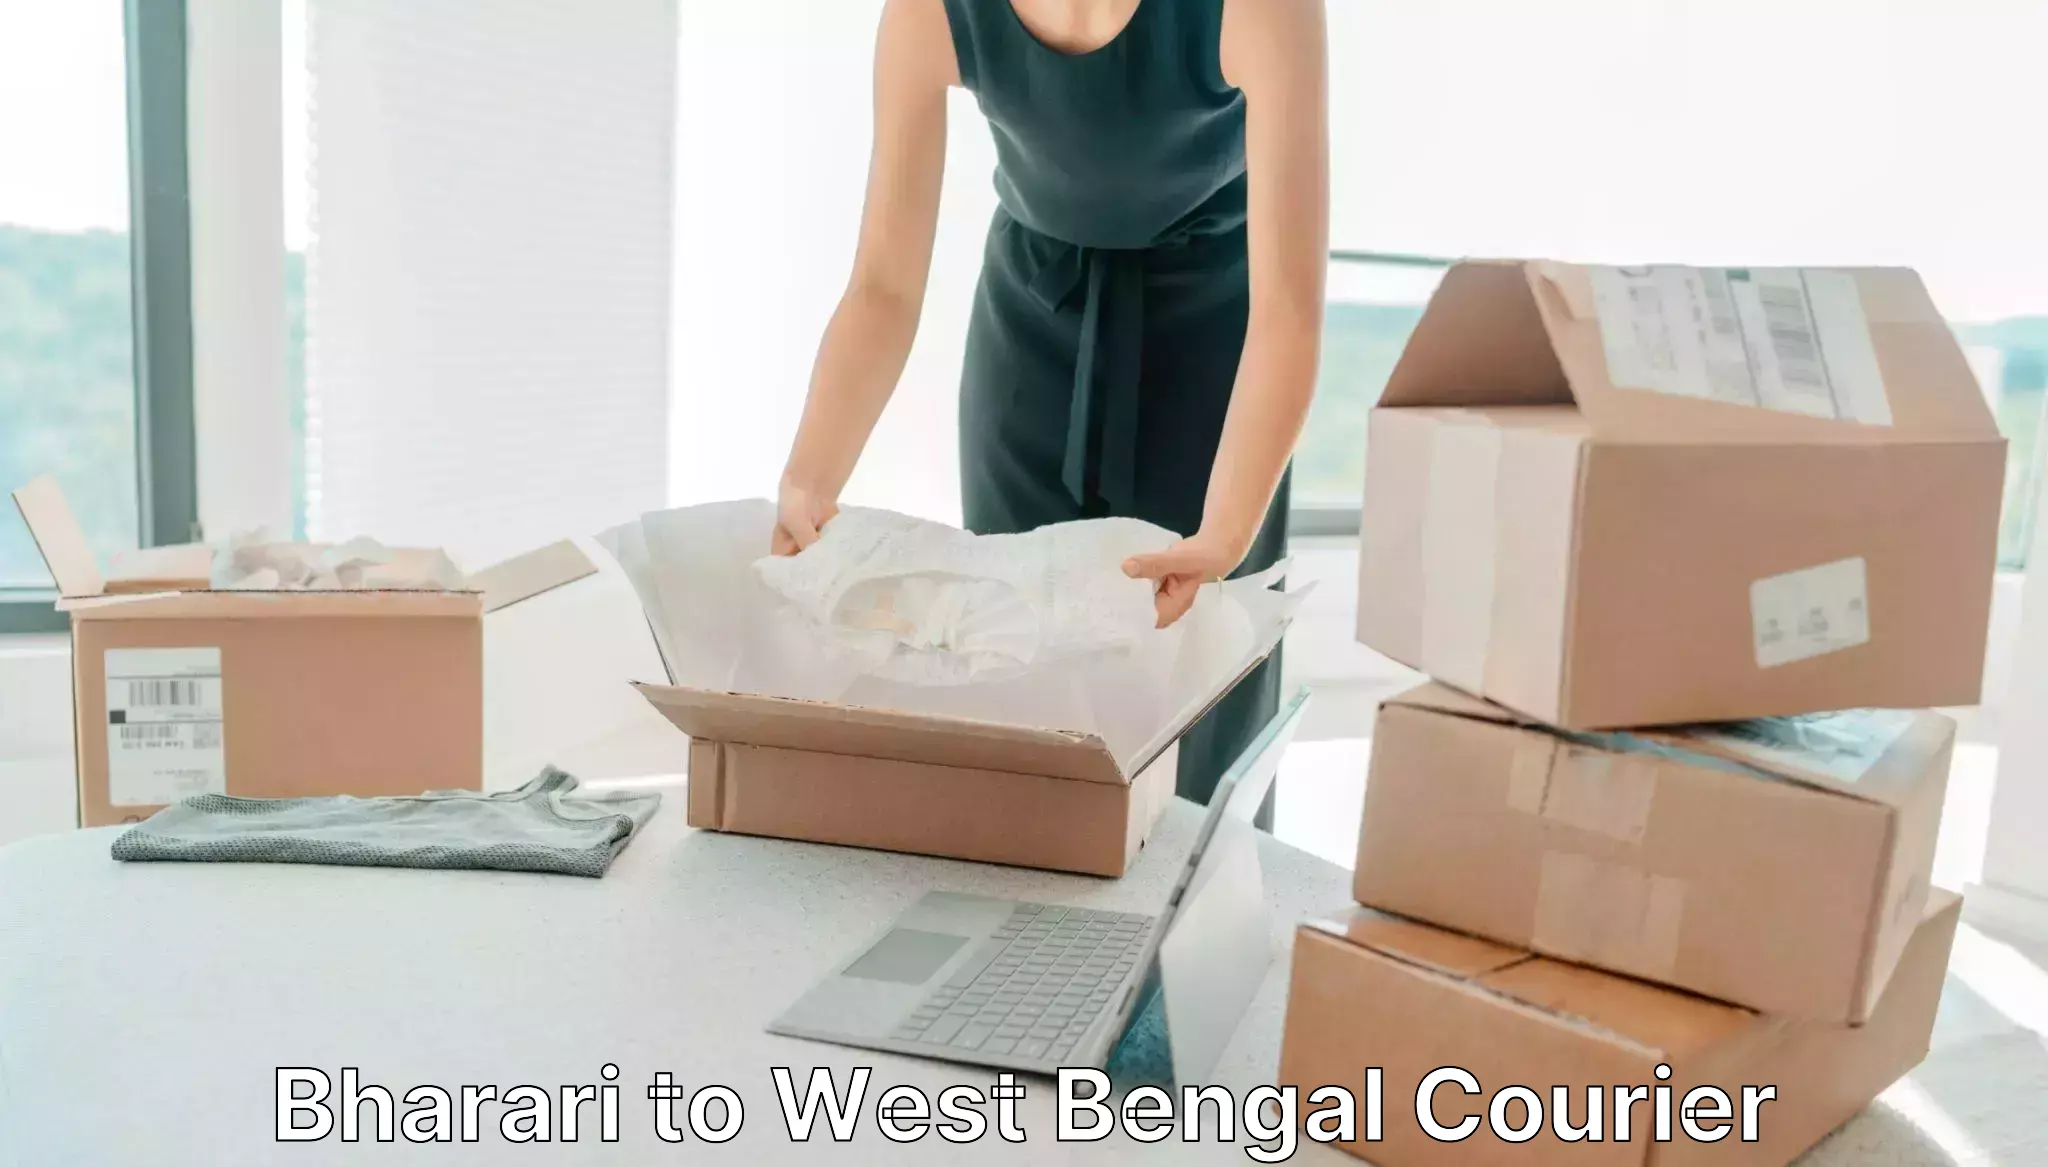 Streamlined delivery processes Bharari to West Bengal